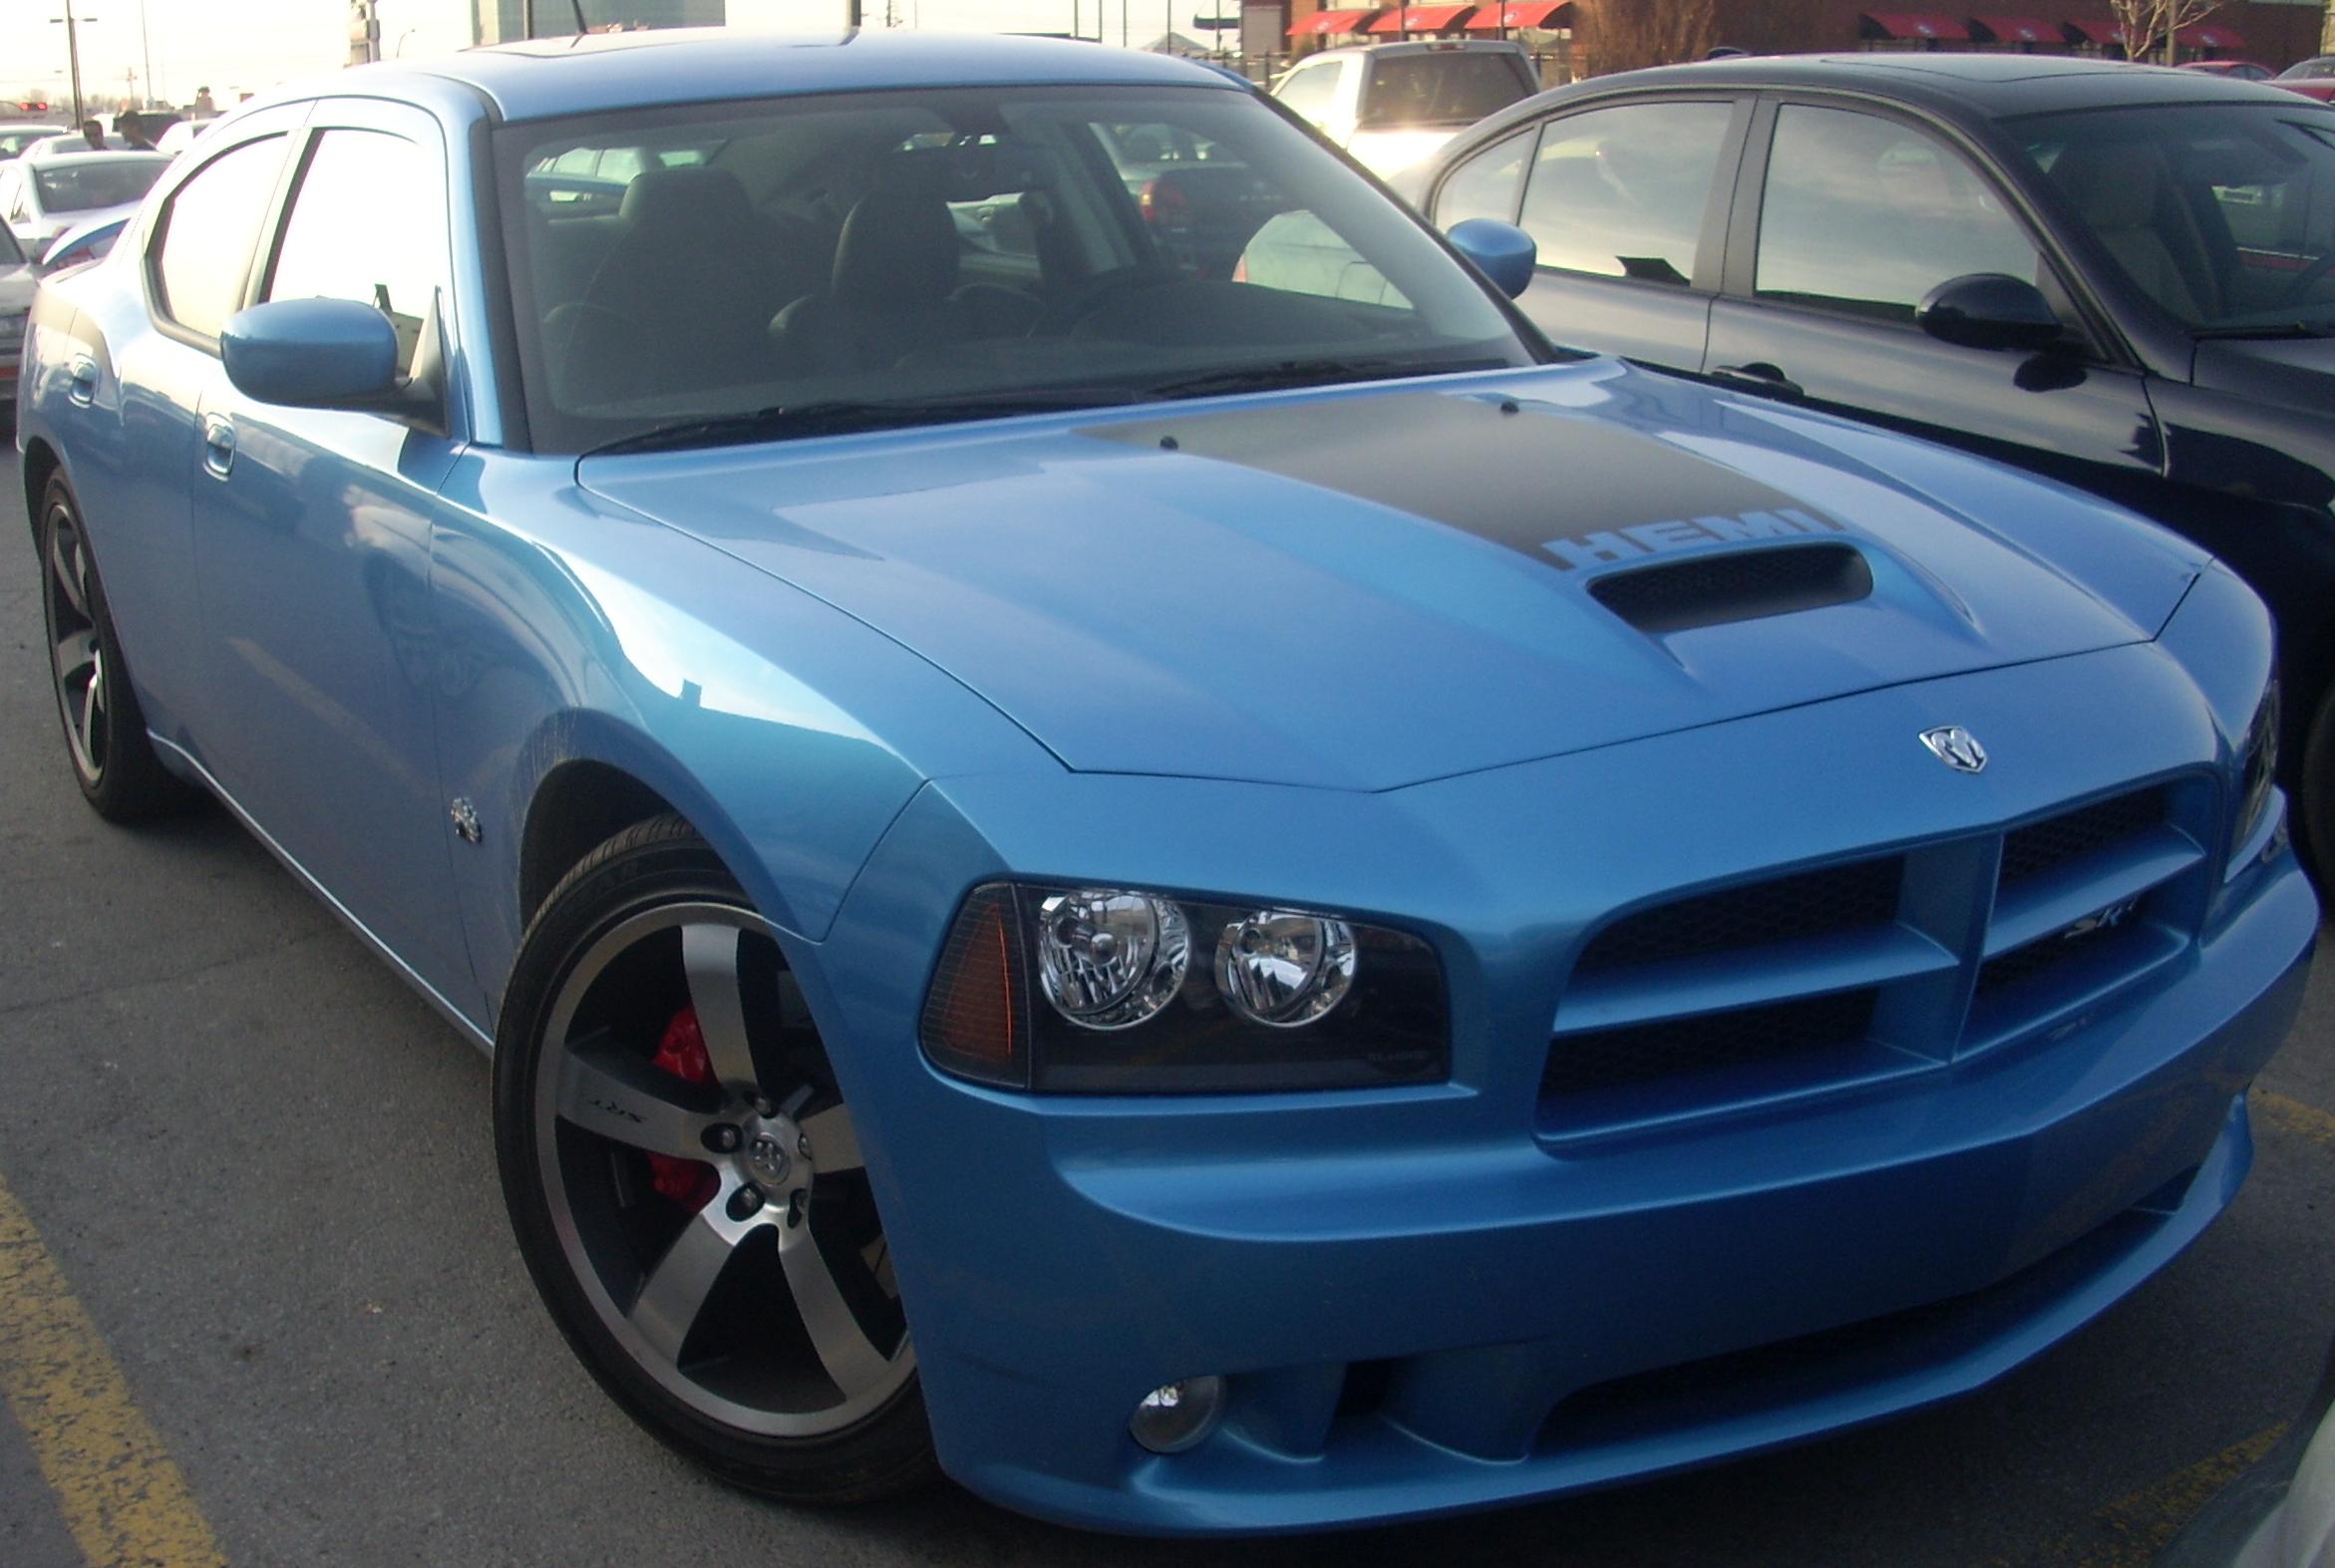 File:Dodge Charger Super Bee.JPG - Wikimedia Commons